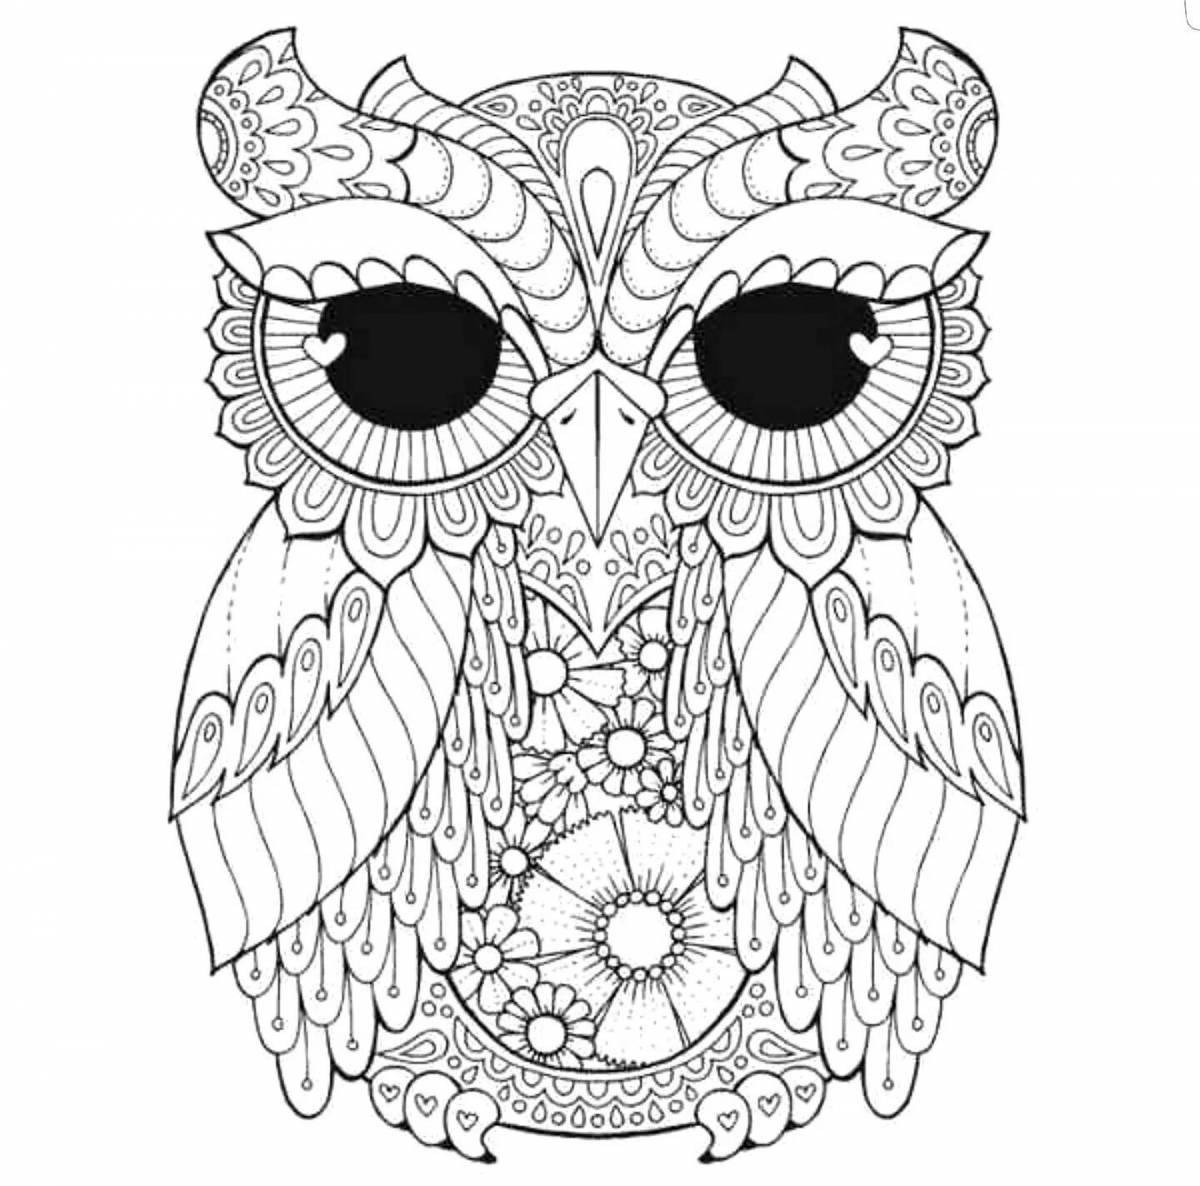 Detailed adult lung coloring page